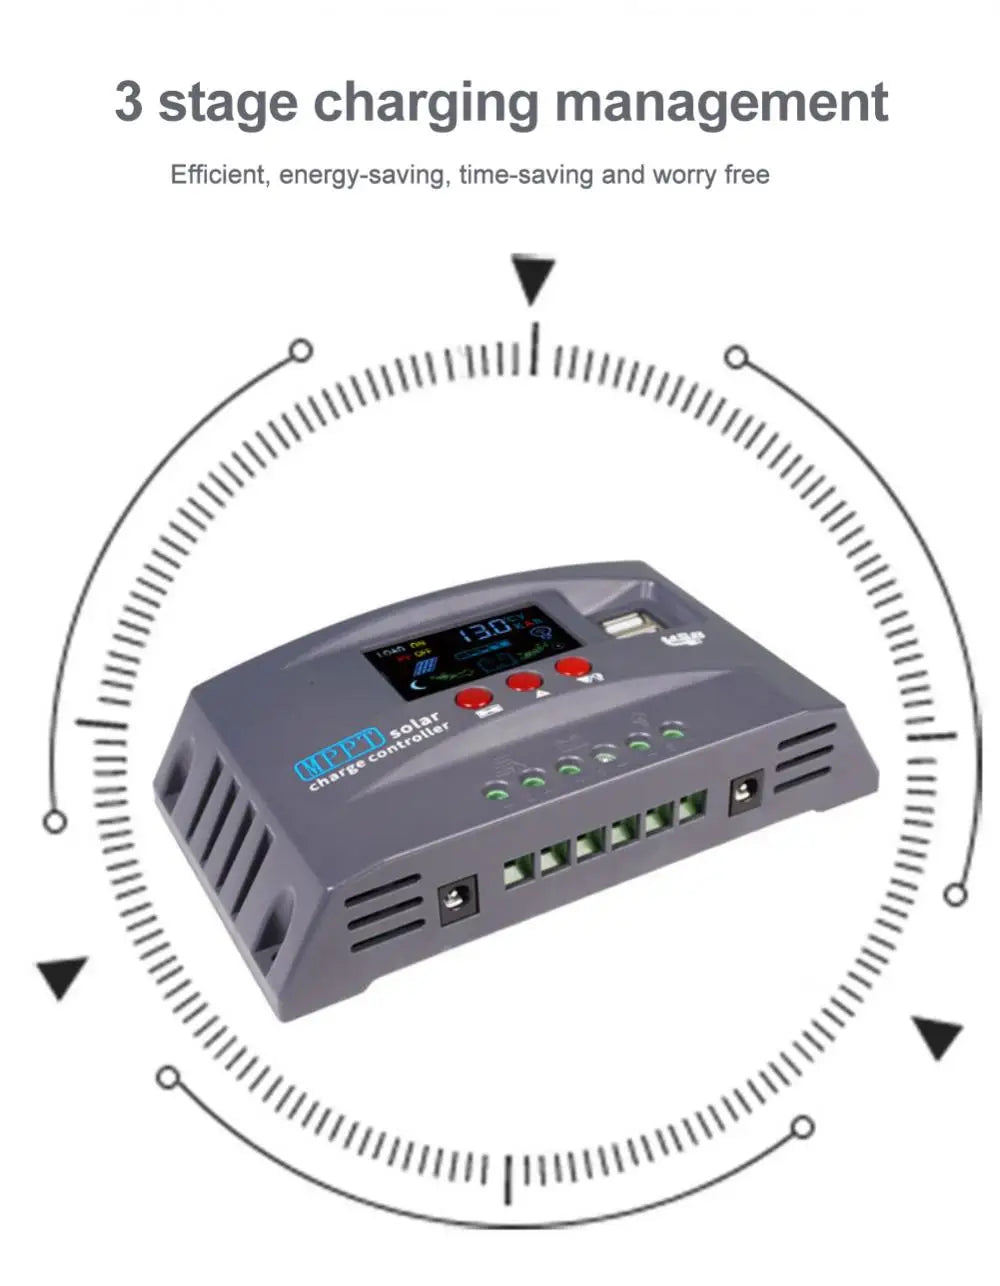 CORUI 10A 20A 30A MPPT Solar Charge Controller, Three-stage charging management ensures efficient, energy-saving, and worry-free operation.